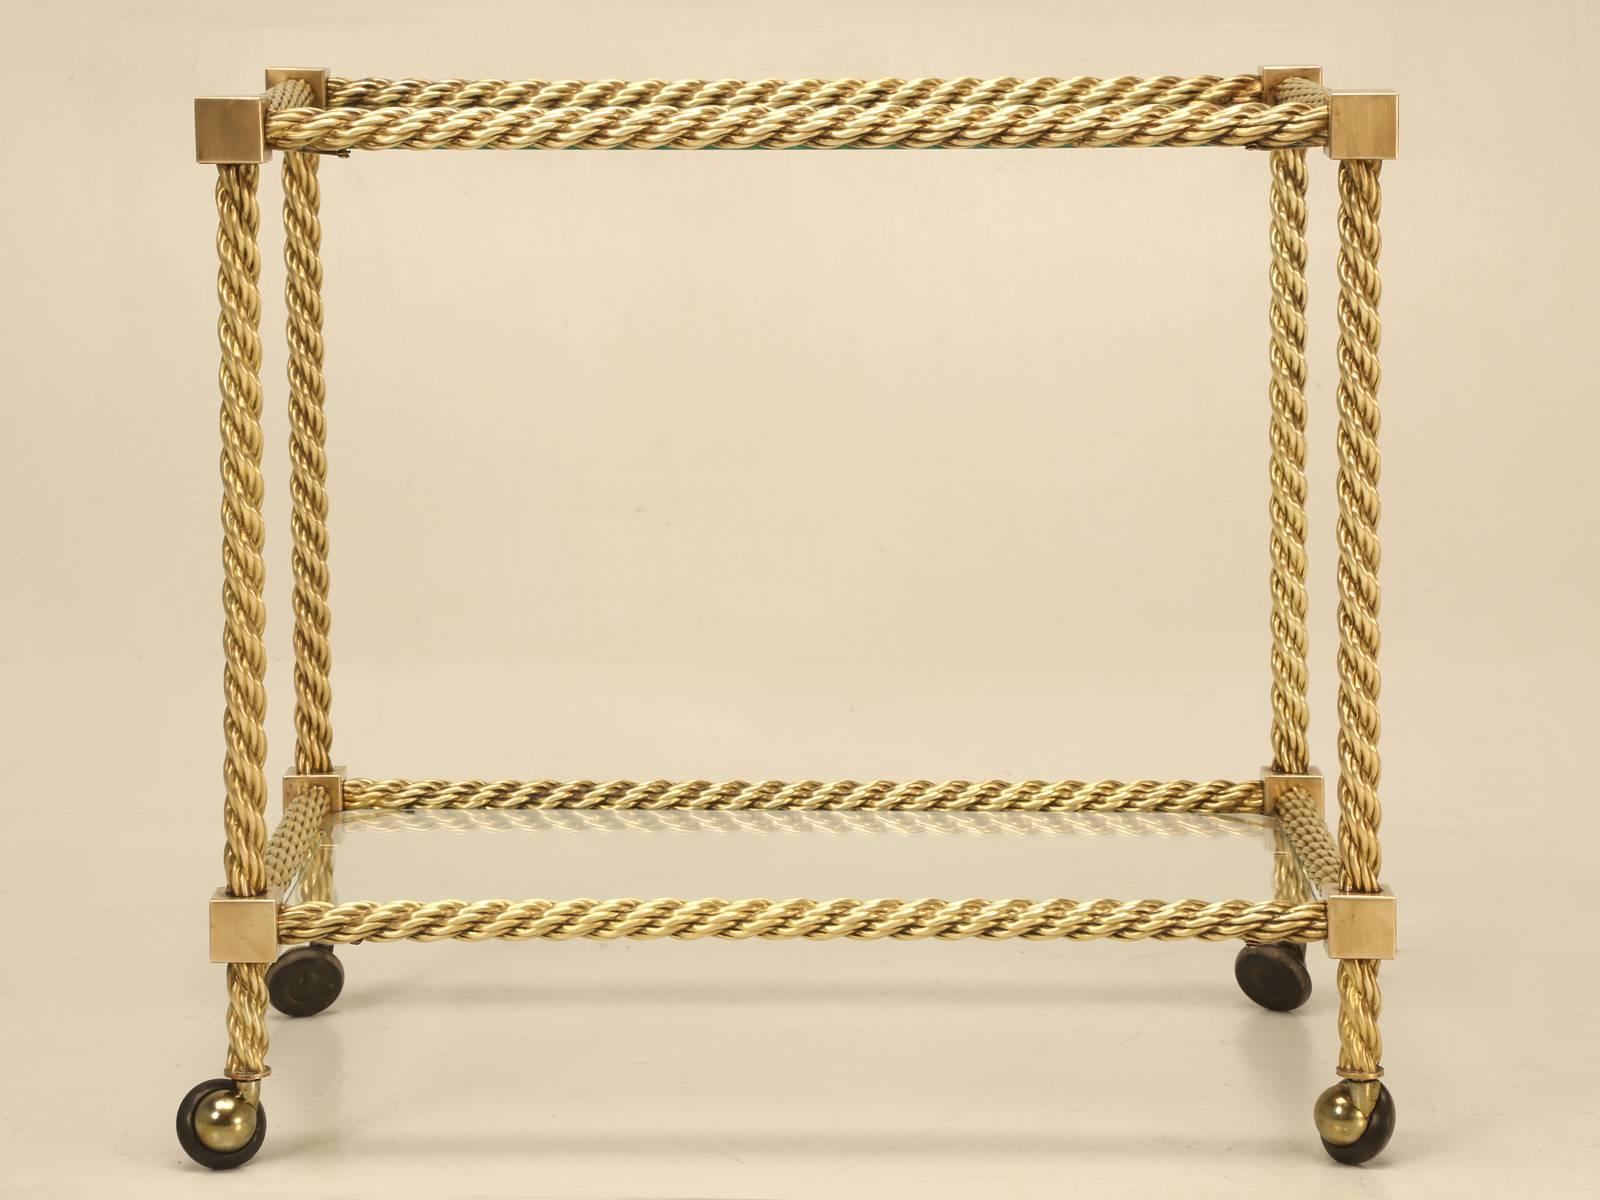 Vintage Mid-Century Modern French brass rope designed bar cart, probably made in the mid-1960s. Certainly not flawless, but in very nice original condition, with no prior repairs made or required.